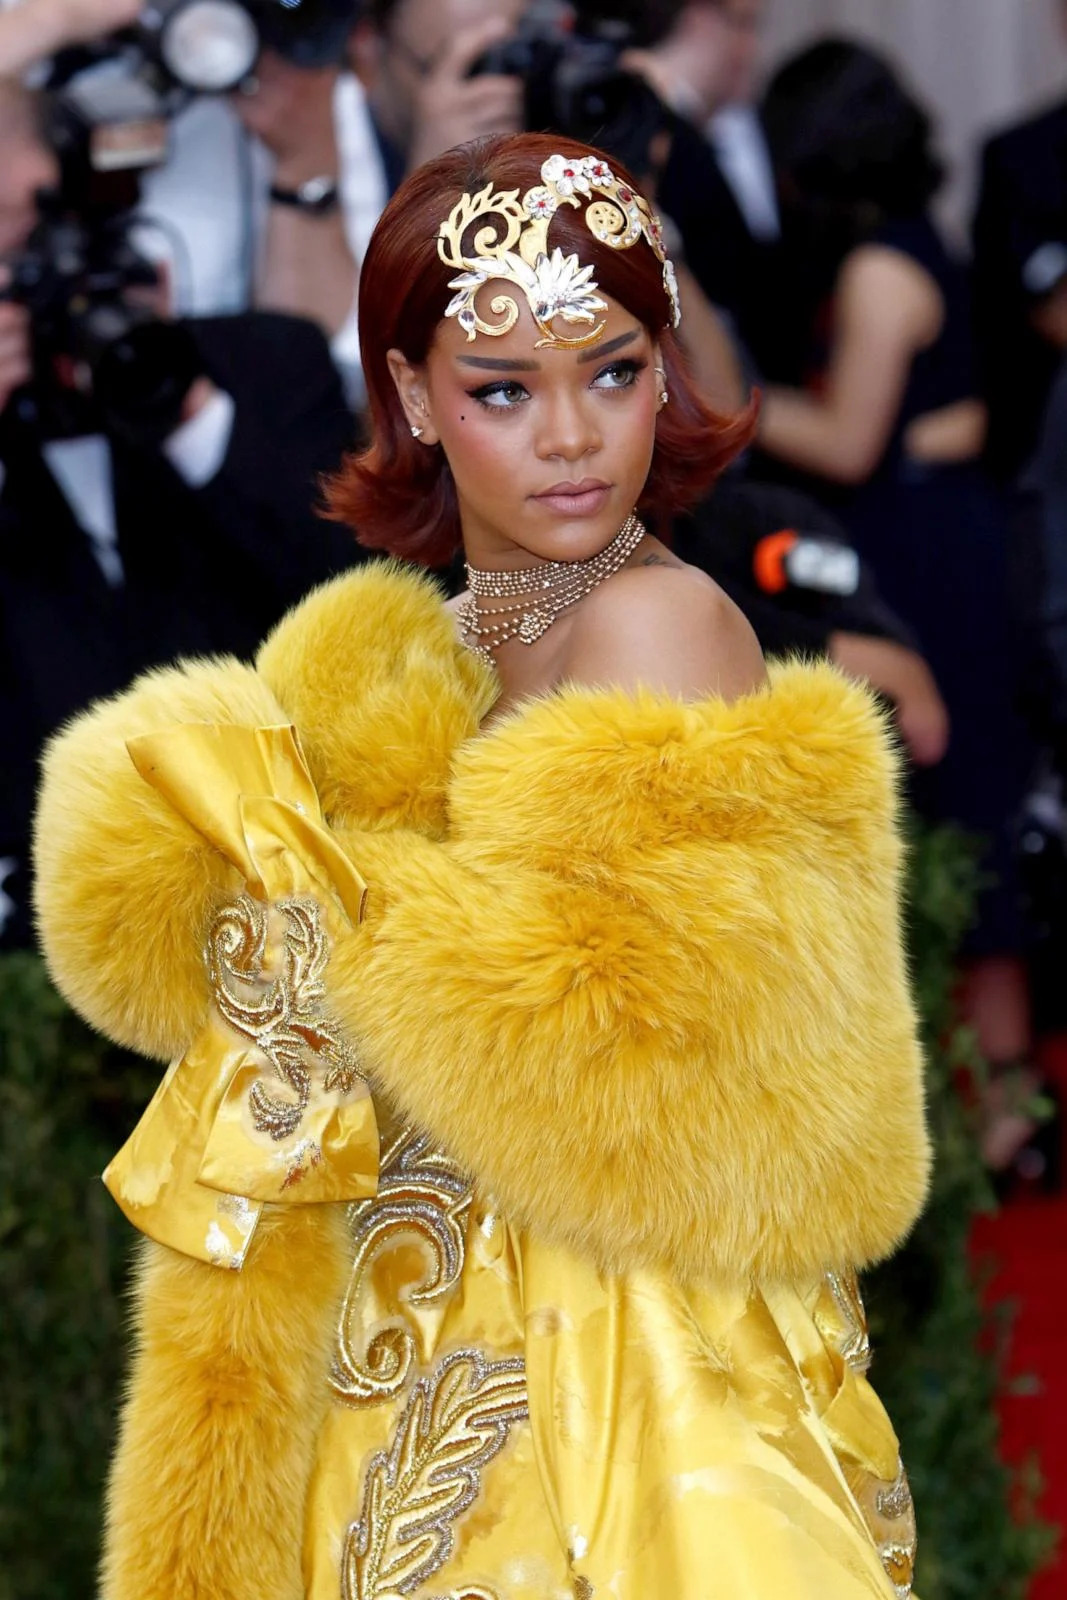 PHOTO: Rihanna attends the 2015 Costume Institute Gala Benefit celebrating the exhibition 'China: Through the Looking Glass' at The Metropolitan Museum of Art in New York, USA, on 04 May 2015.  (Hubert Boesl/picture alliance via Getty Images)